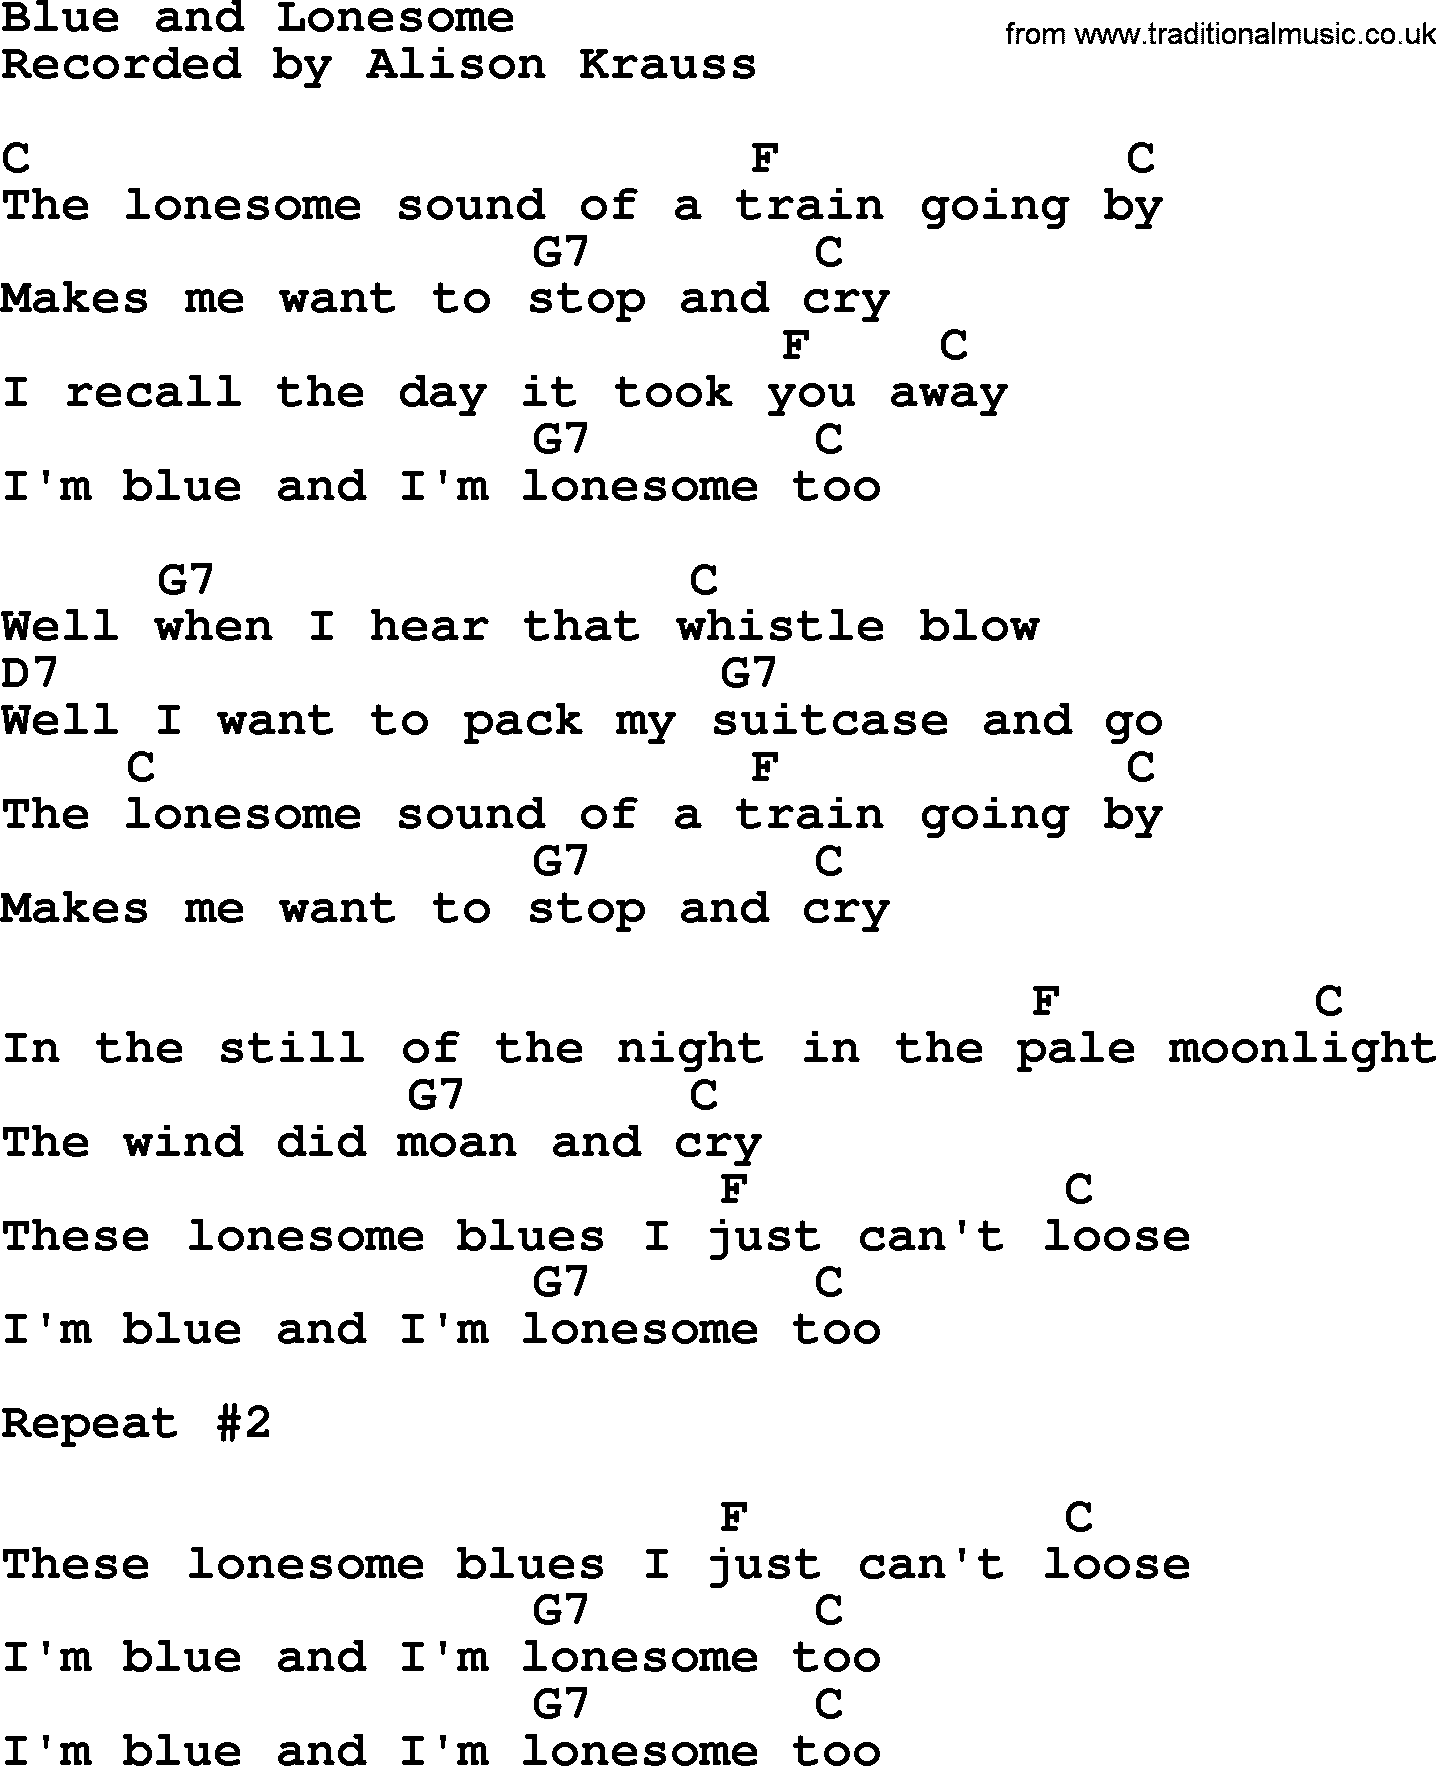 Bluegrass song: Blue And Lonesome, lyrics and chords